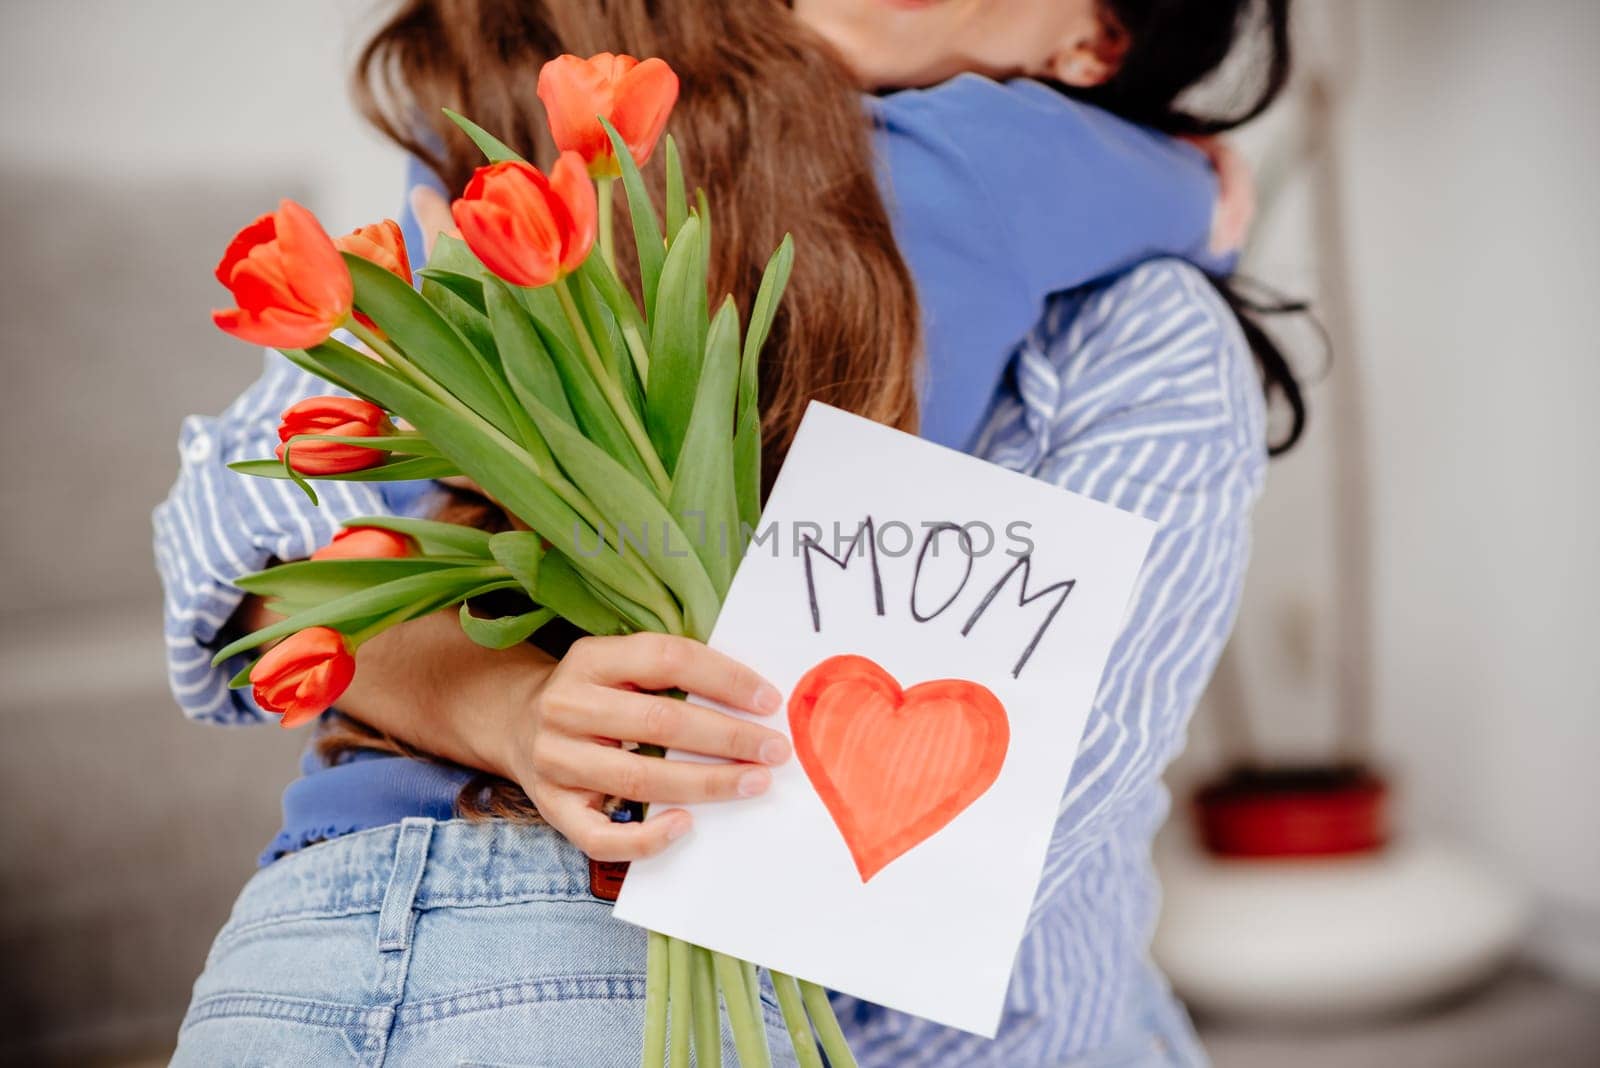 Grateful mom hugging daughter girl, holding flowers bouquet, receiving hand drawn greeting card with loving heart from girl, smiling at camera. Mothers day, 8 march, concept. Head shot portrait. Close-up of hands holding a bouquet of tulips and a handmade card.